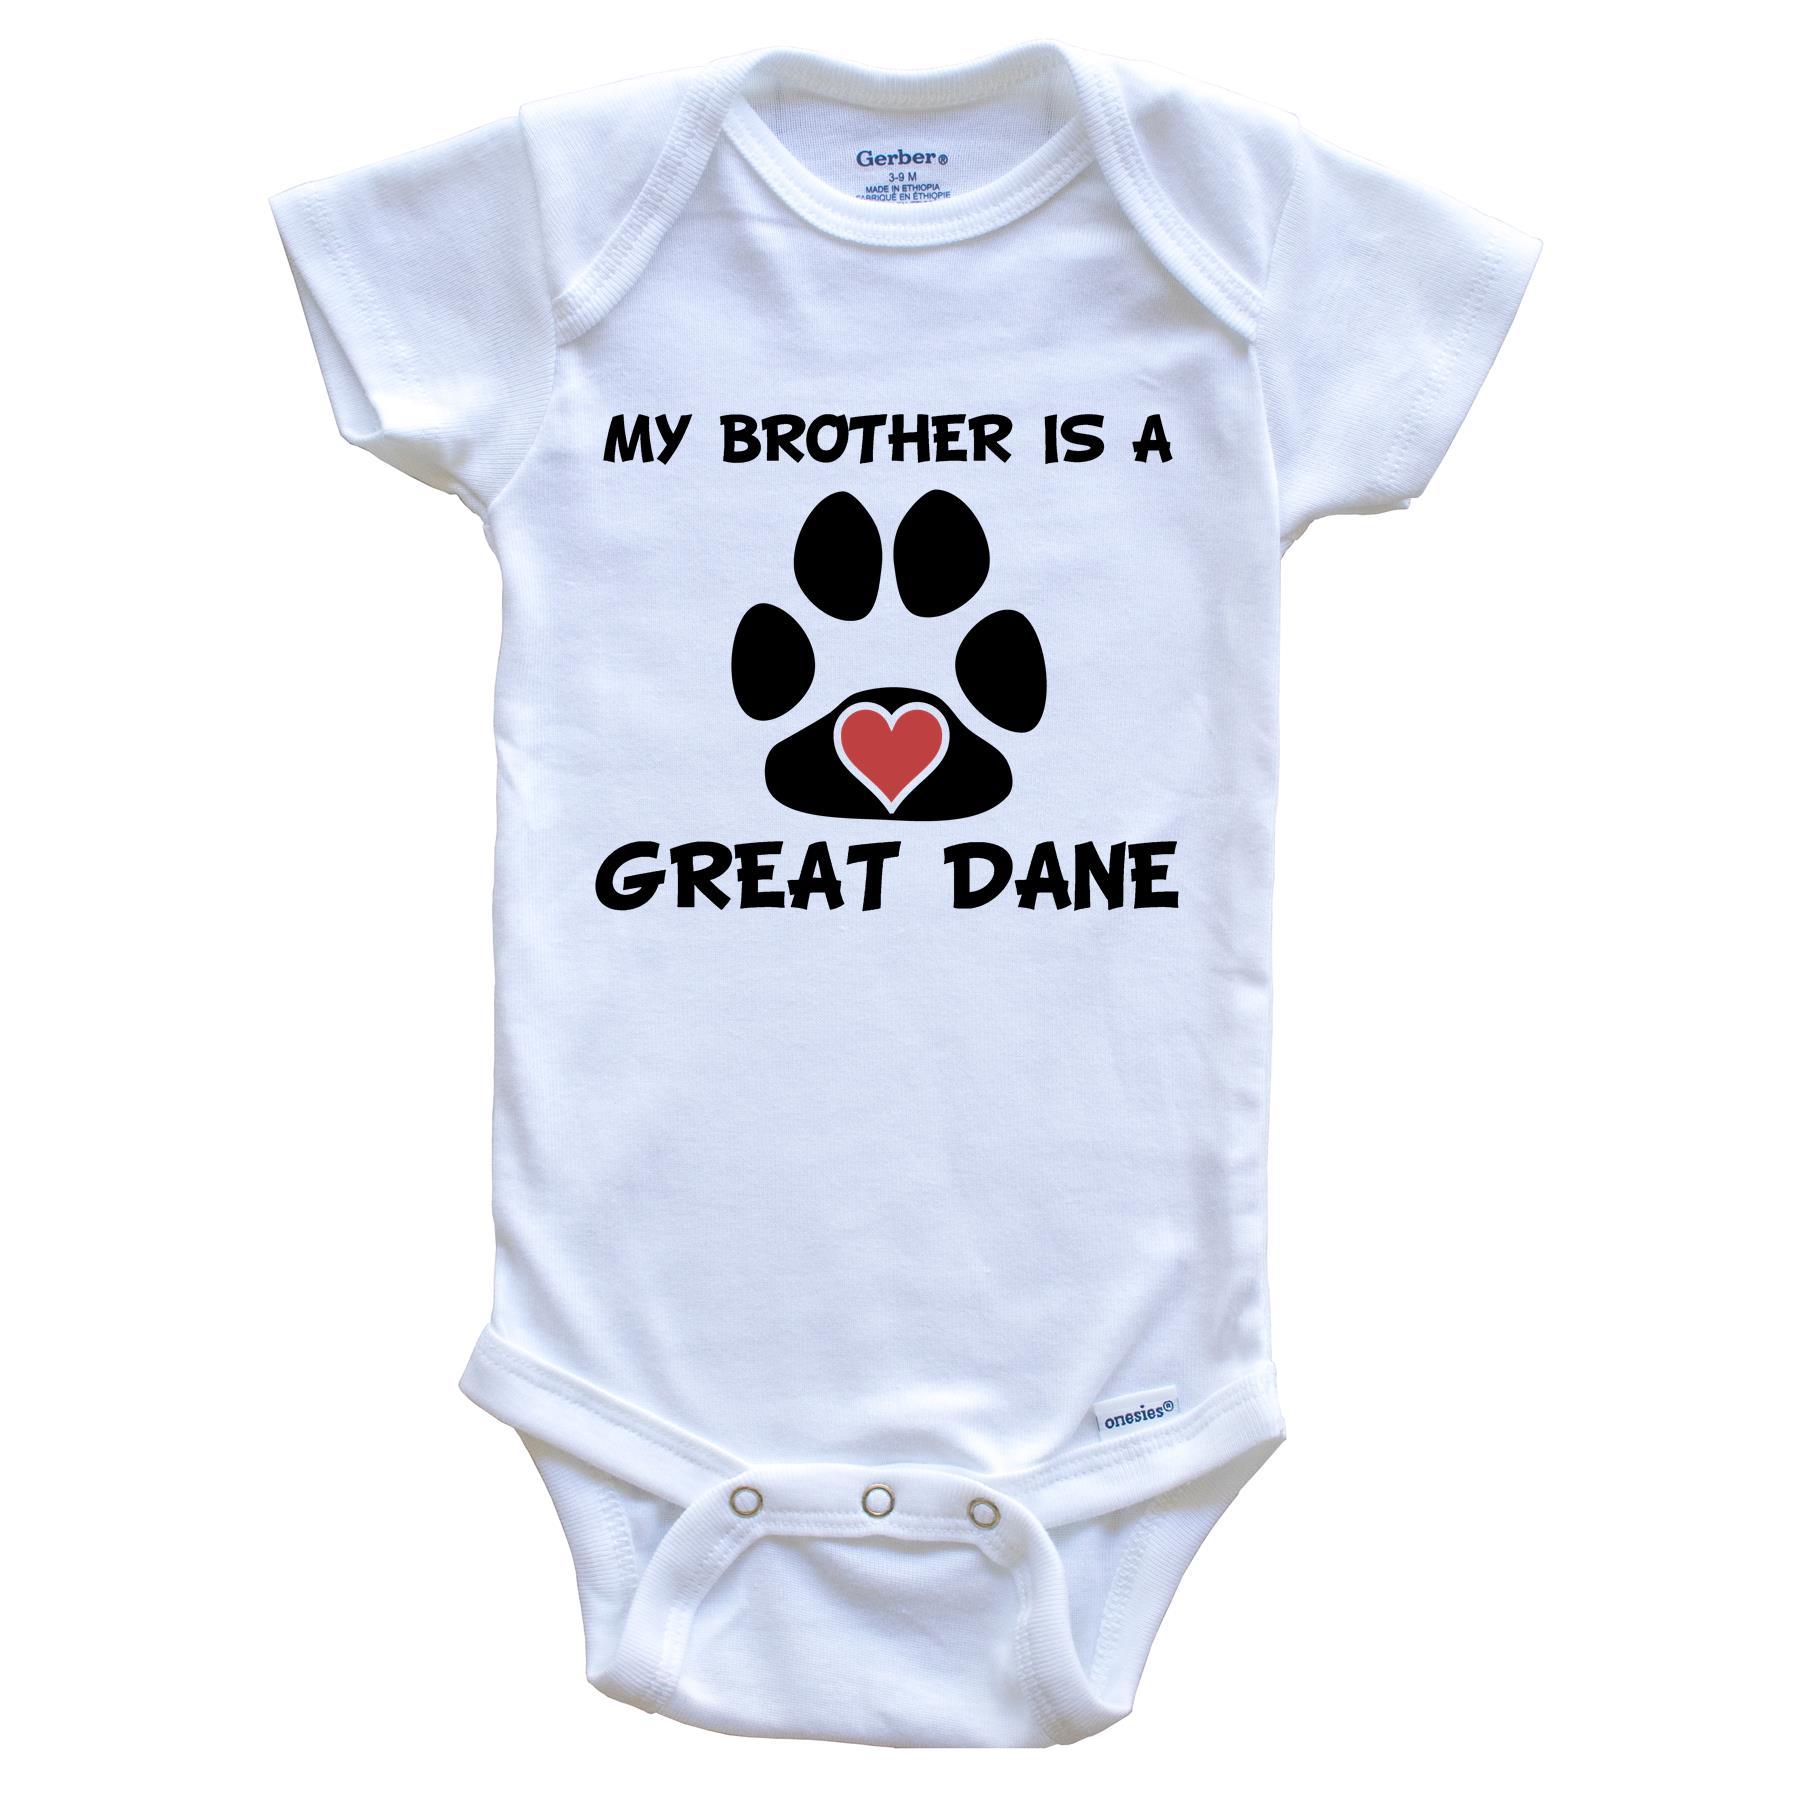 My Brother Is A Great Dane Baby Onesie